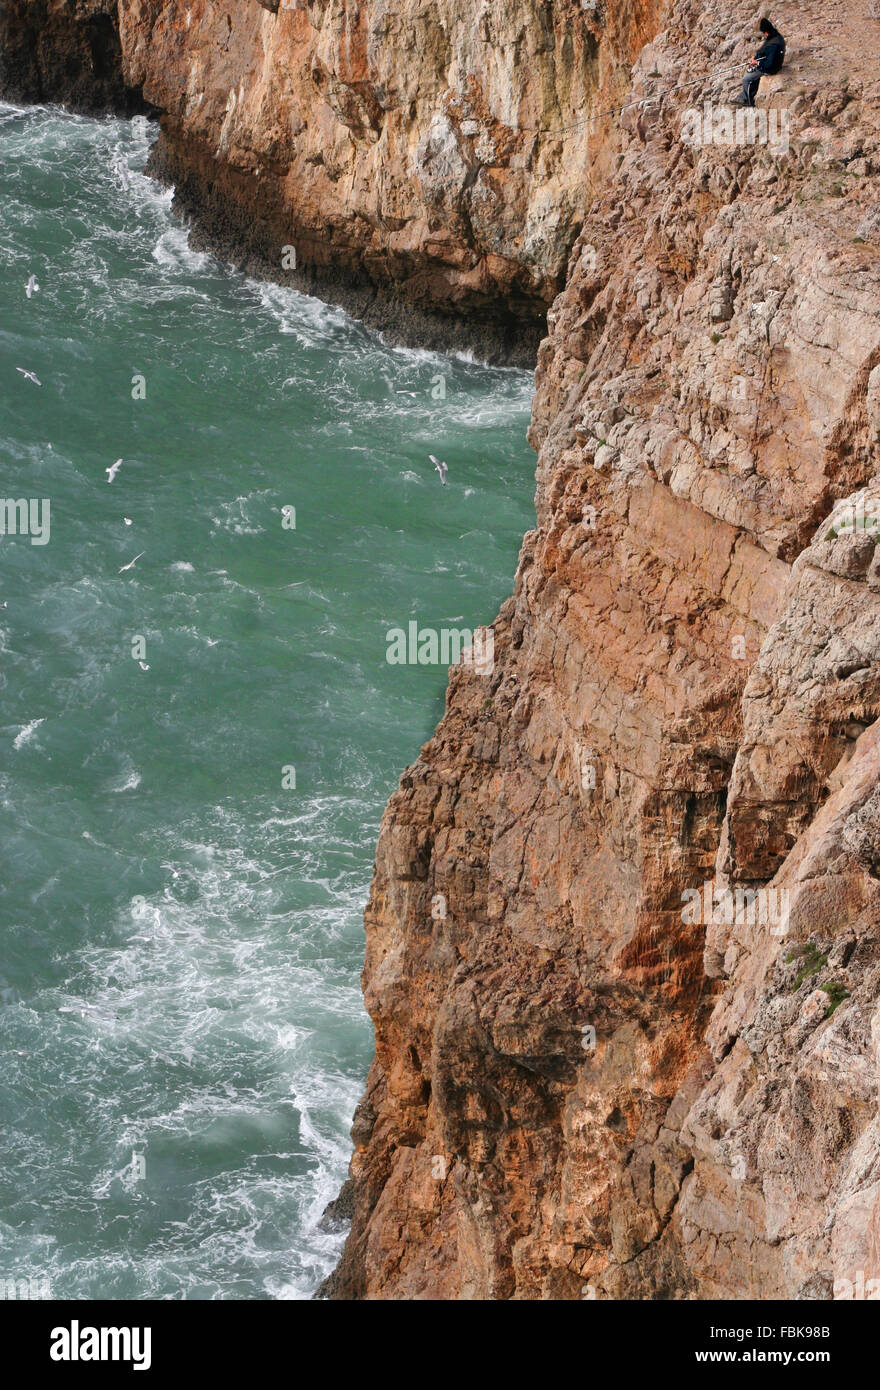 Severe dramatic seascape with fisherman in Cape Saint Vicent cliffs, Portugal Stock Photo